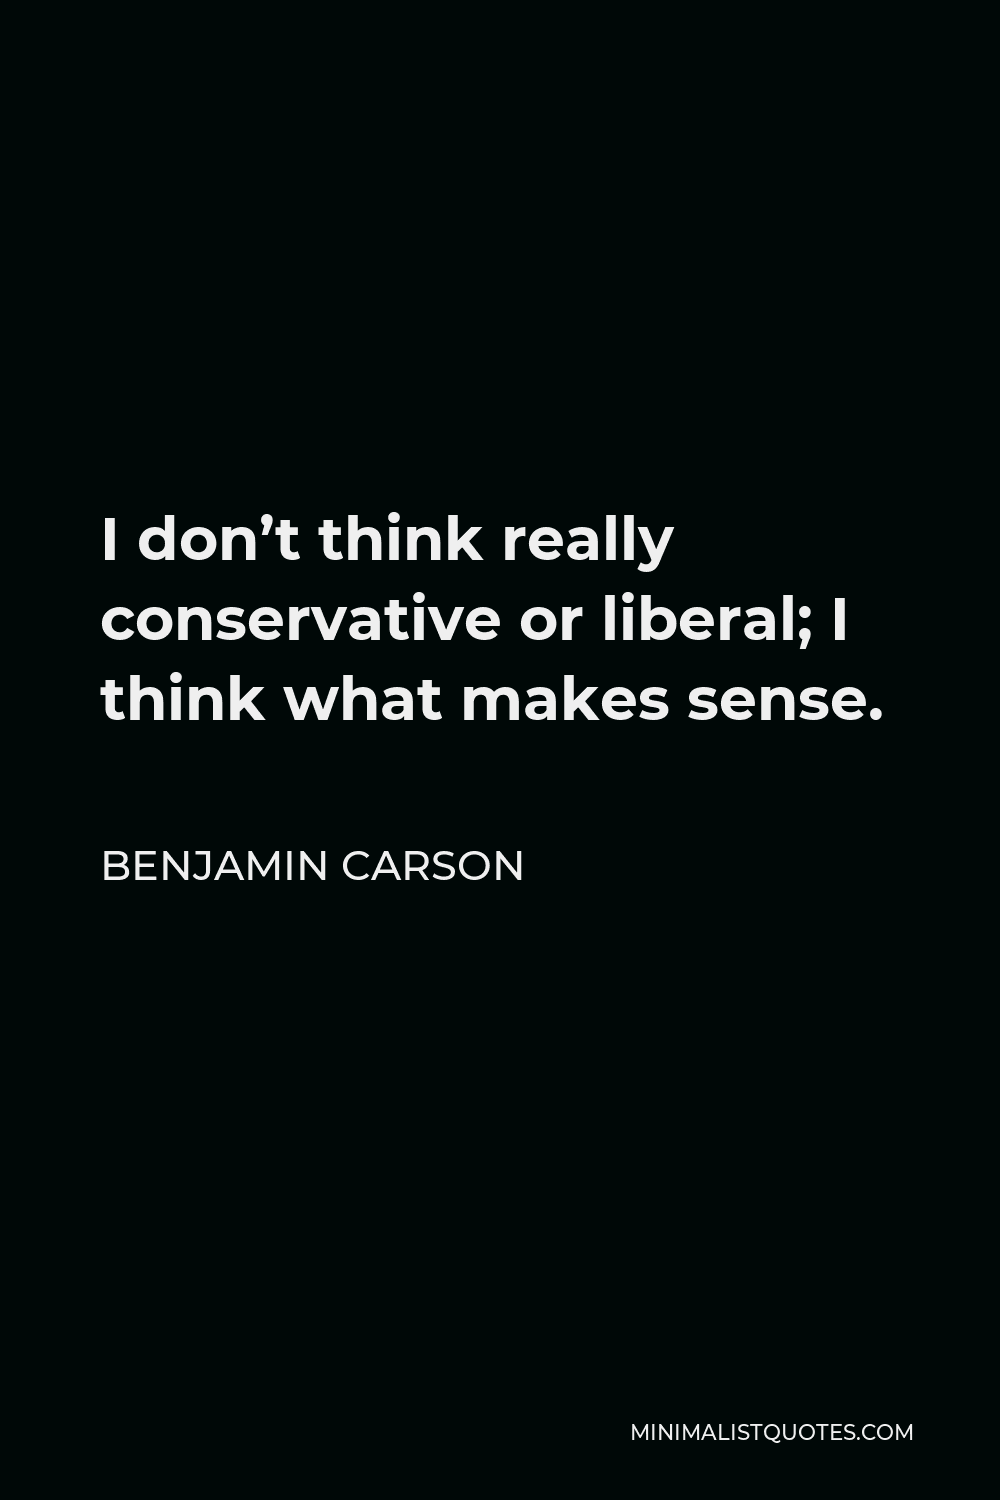 Benjamin Carson Quote - I don’t think really conservative or liberal; I think what makes sense.